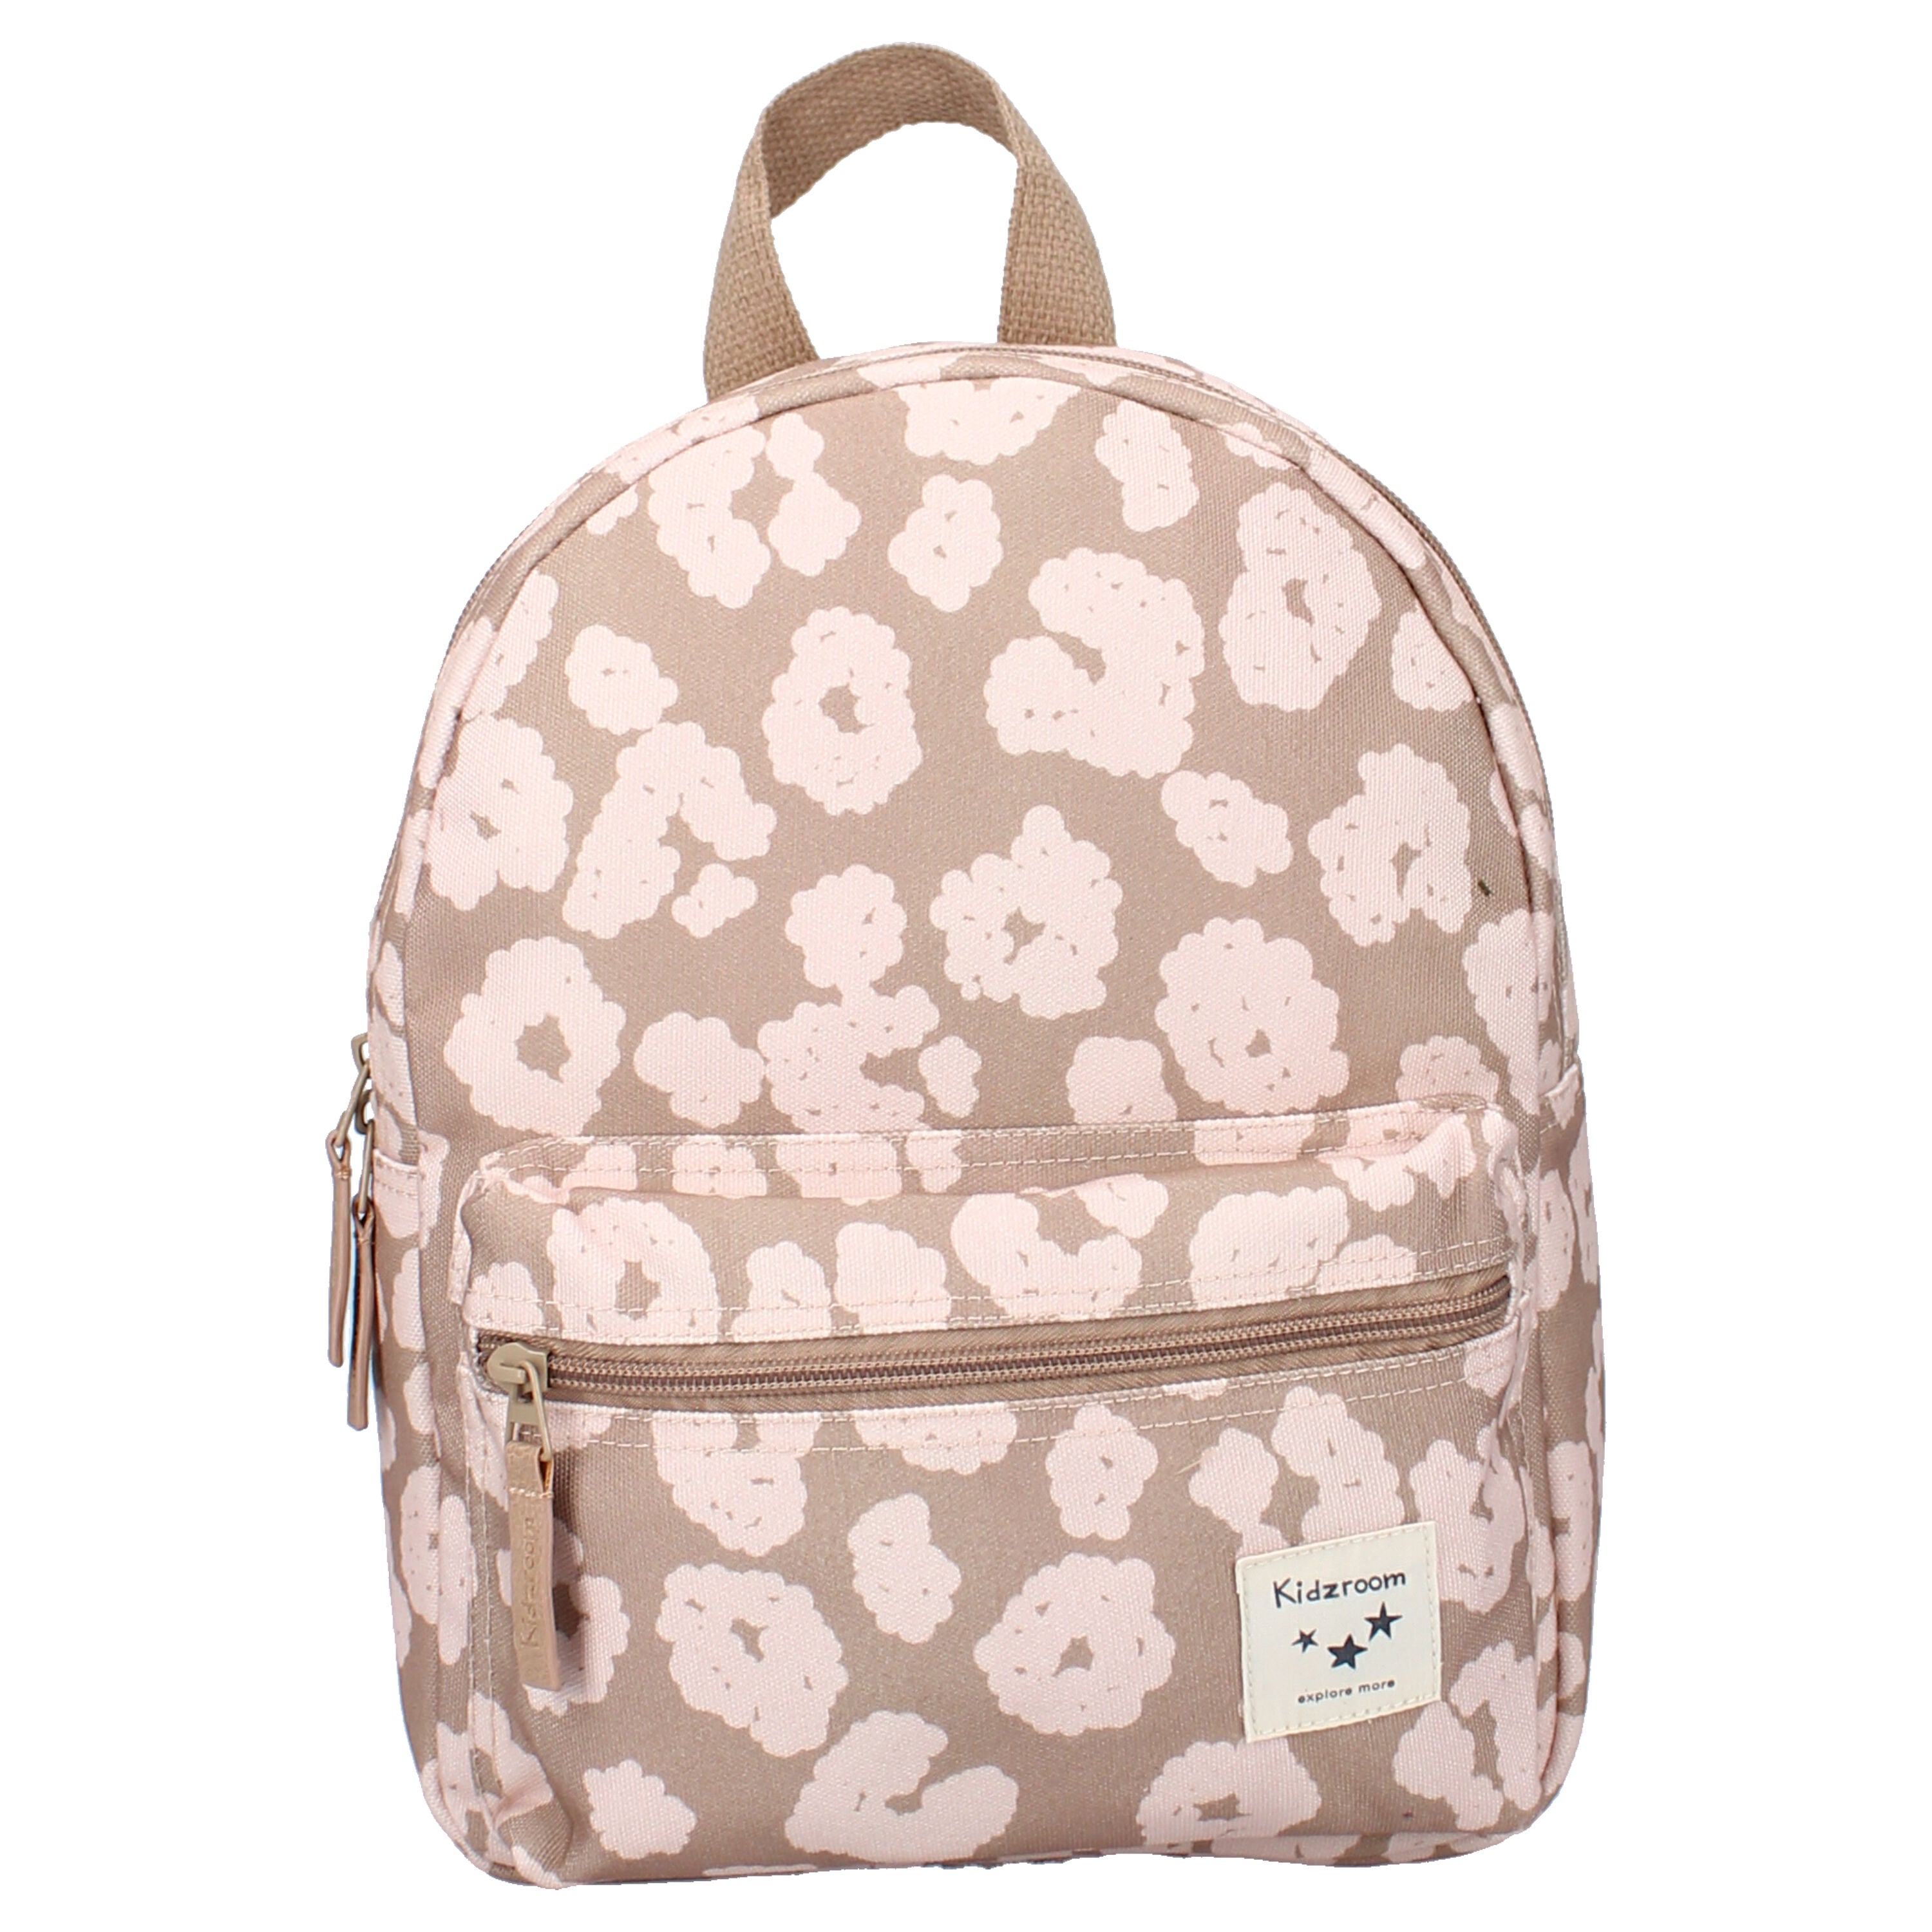 Kidzroom Backpack Adore More Sand